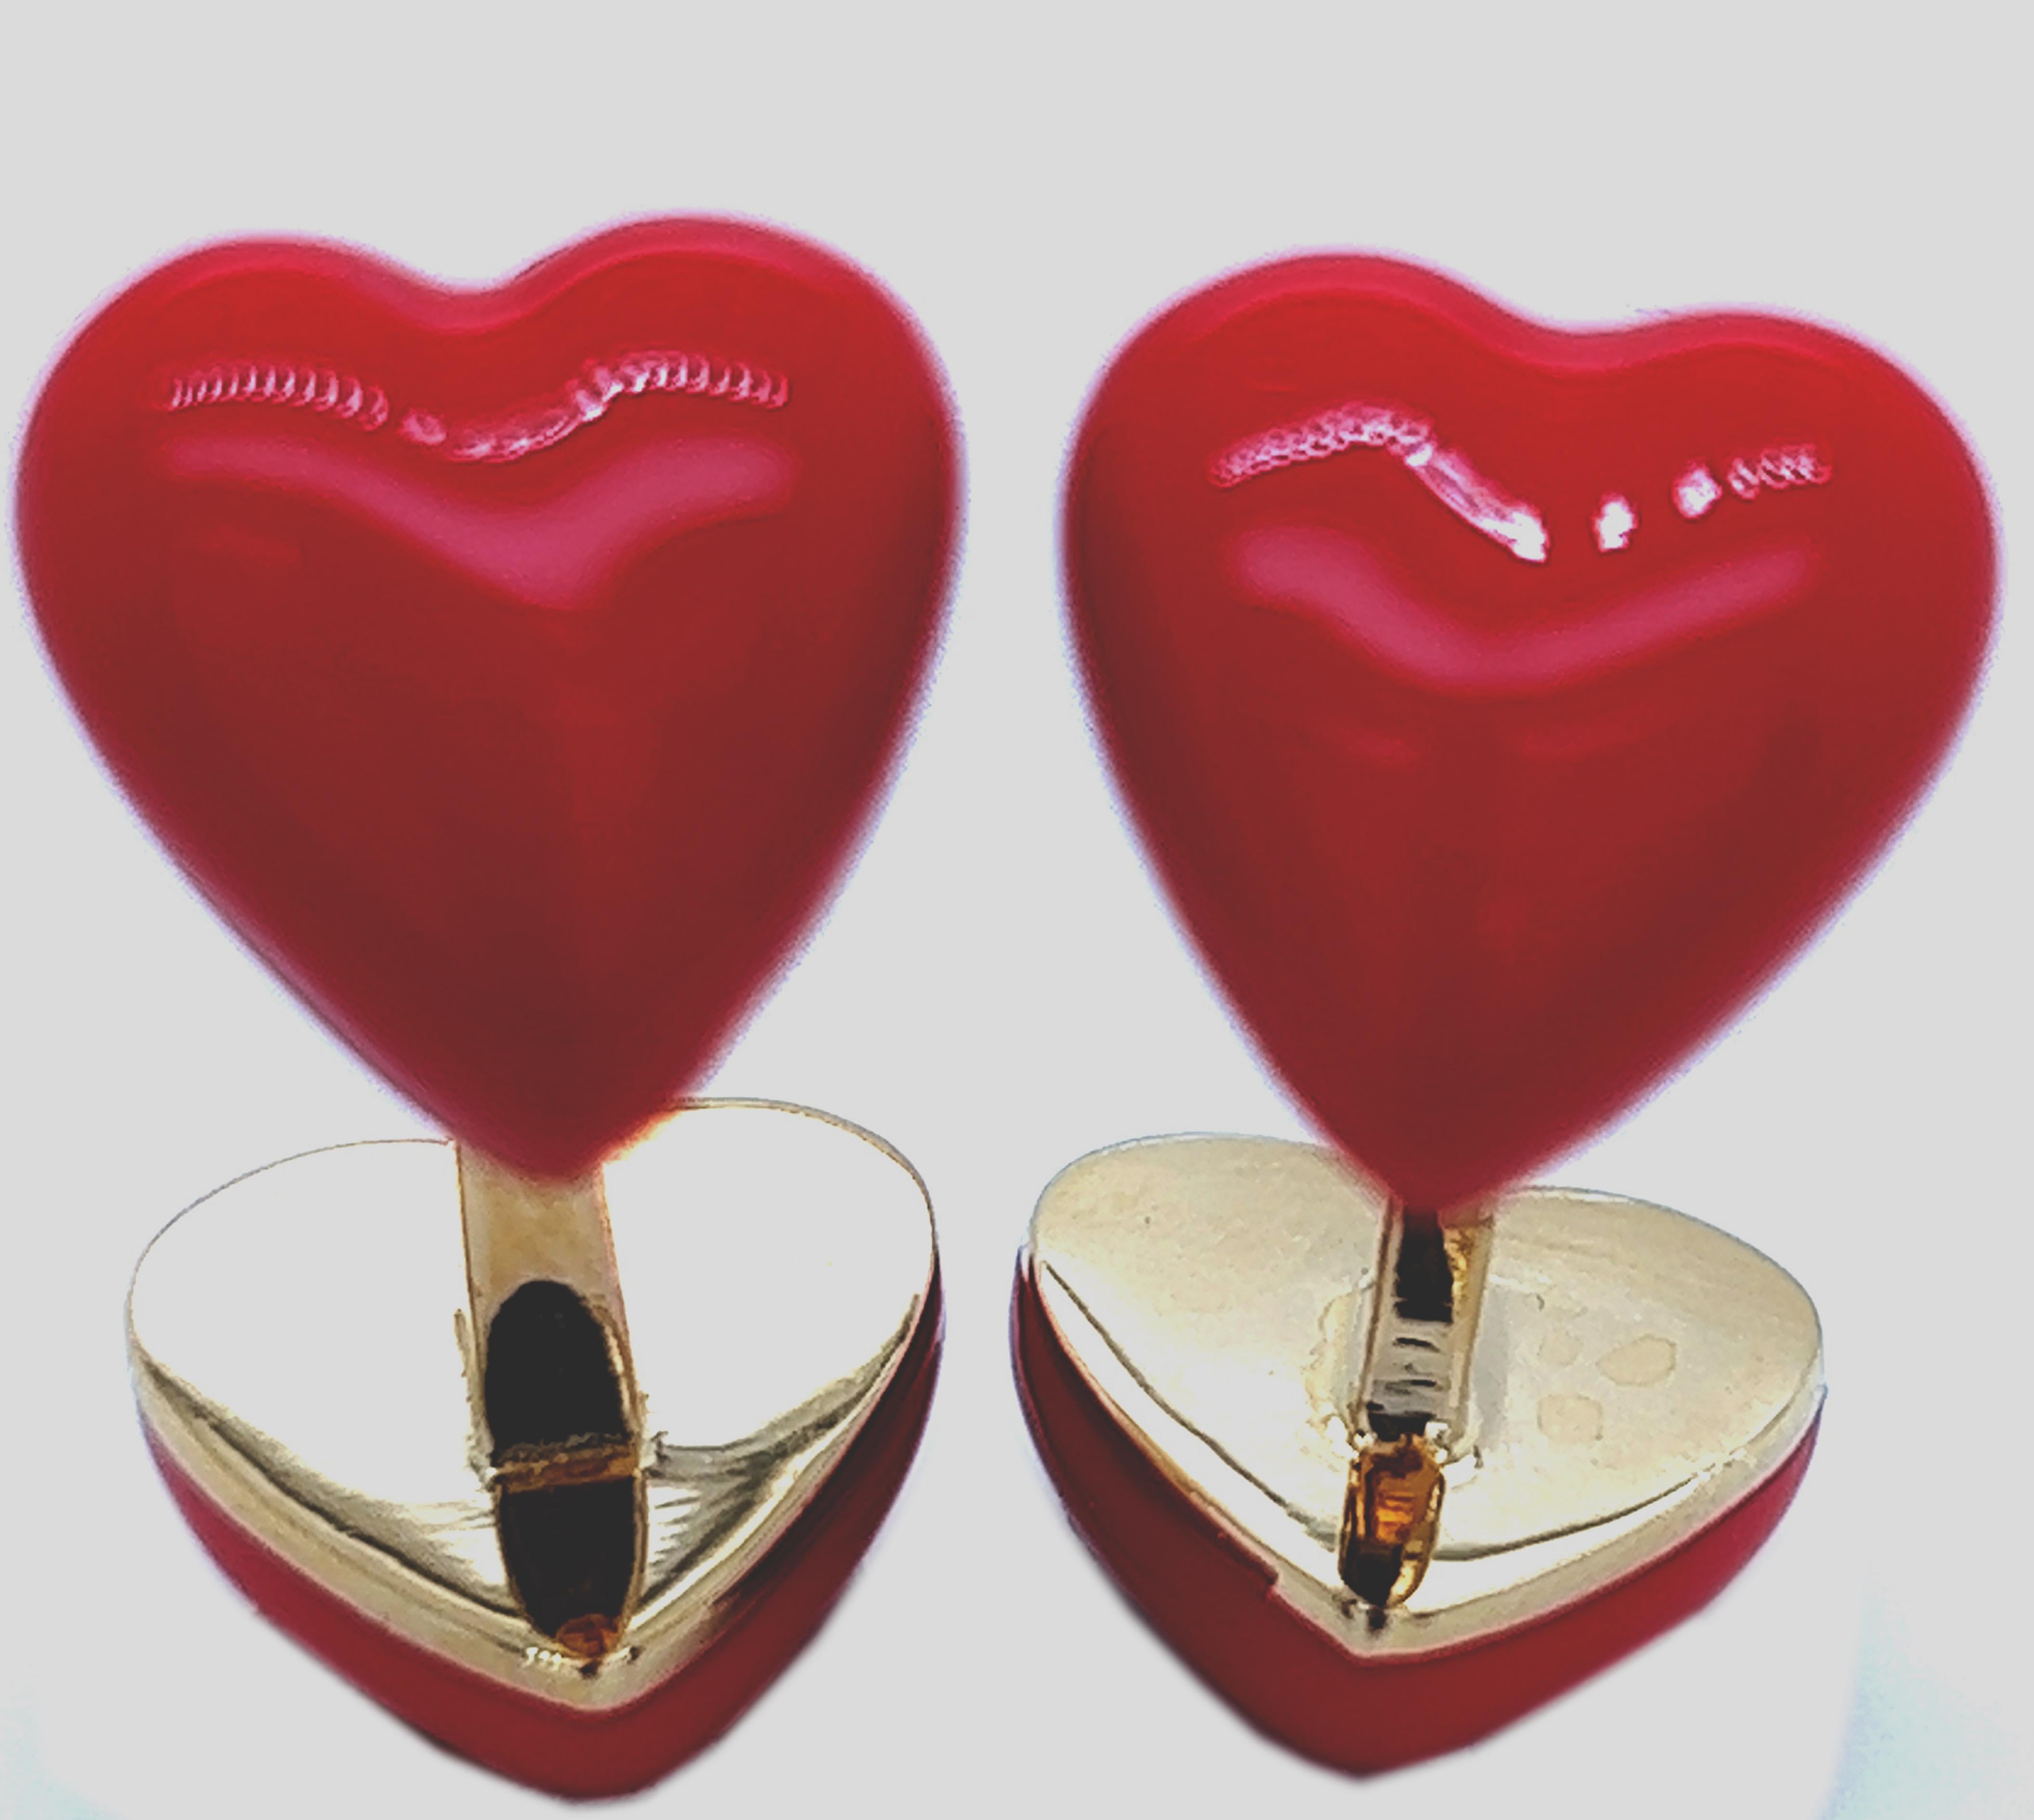 Unique, absolutely Chic yet Timeless Red Heart Cabochon Shaped Hand Enamelled Sterling Silver Gold-Plated Setting Cufflinks.
In our fitted smart Suede Leather Case and Pouch.